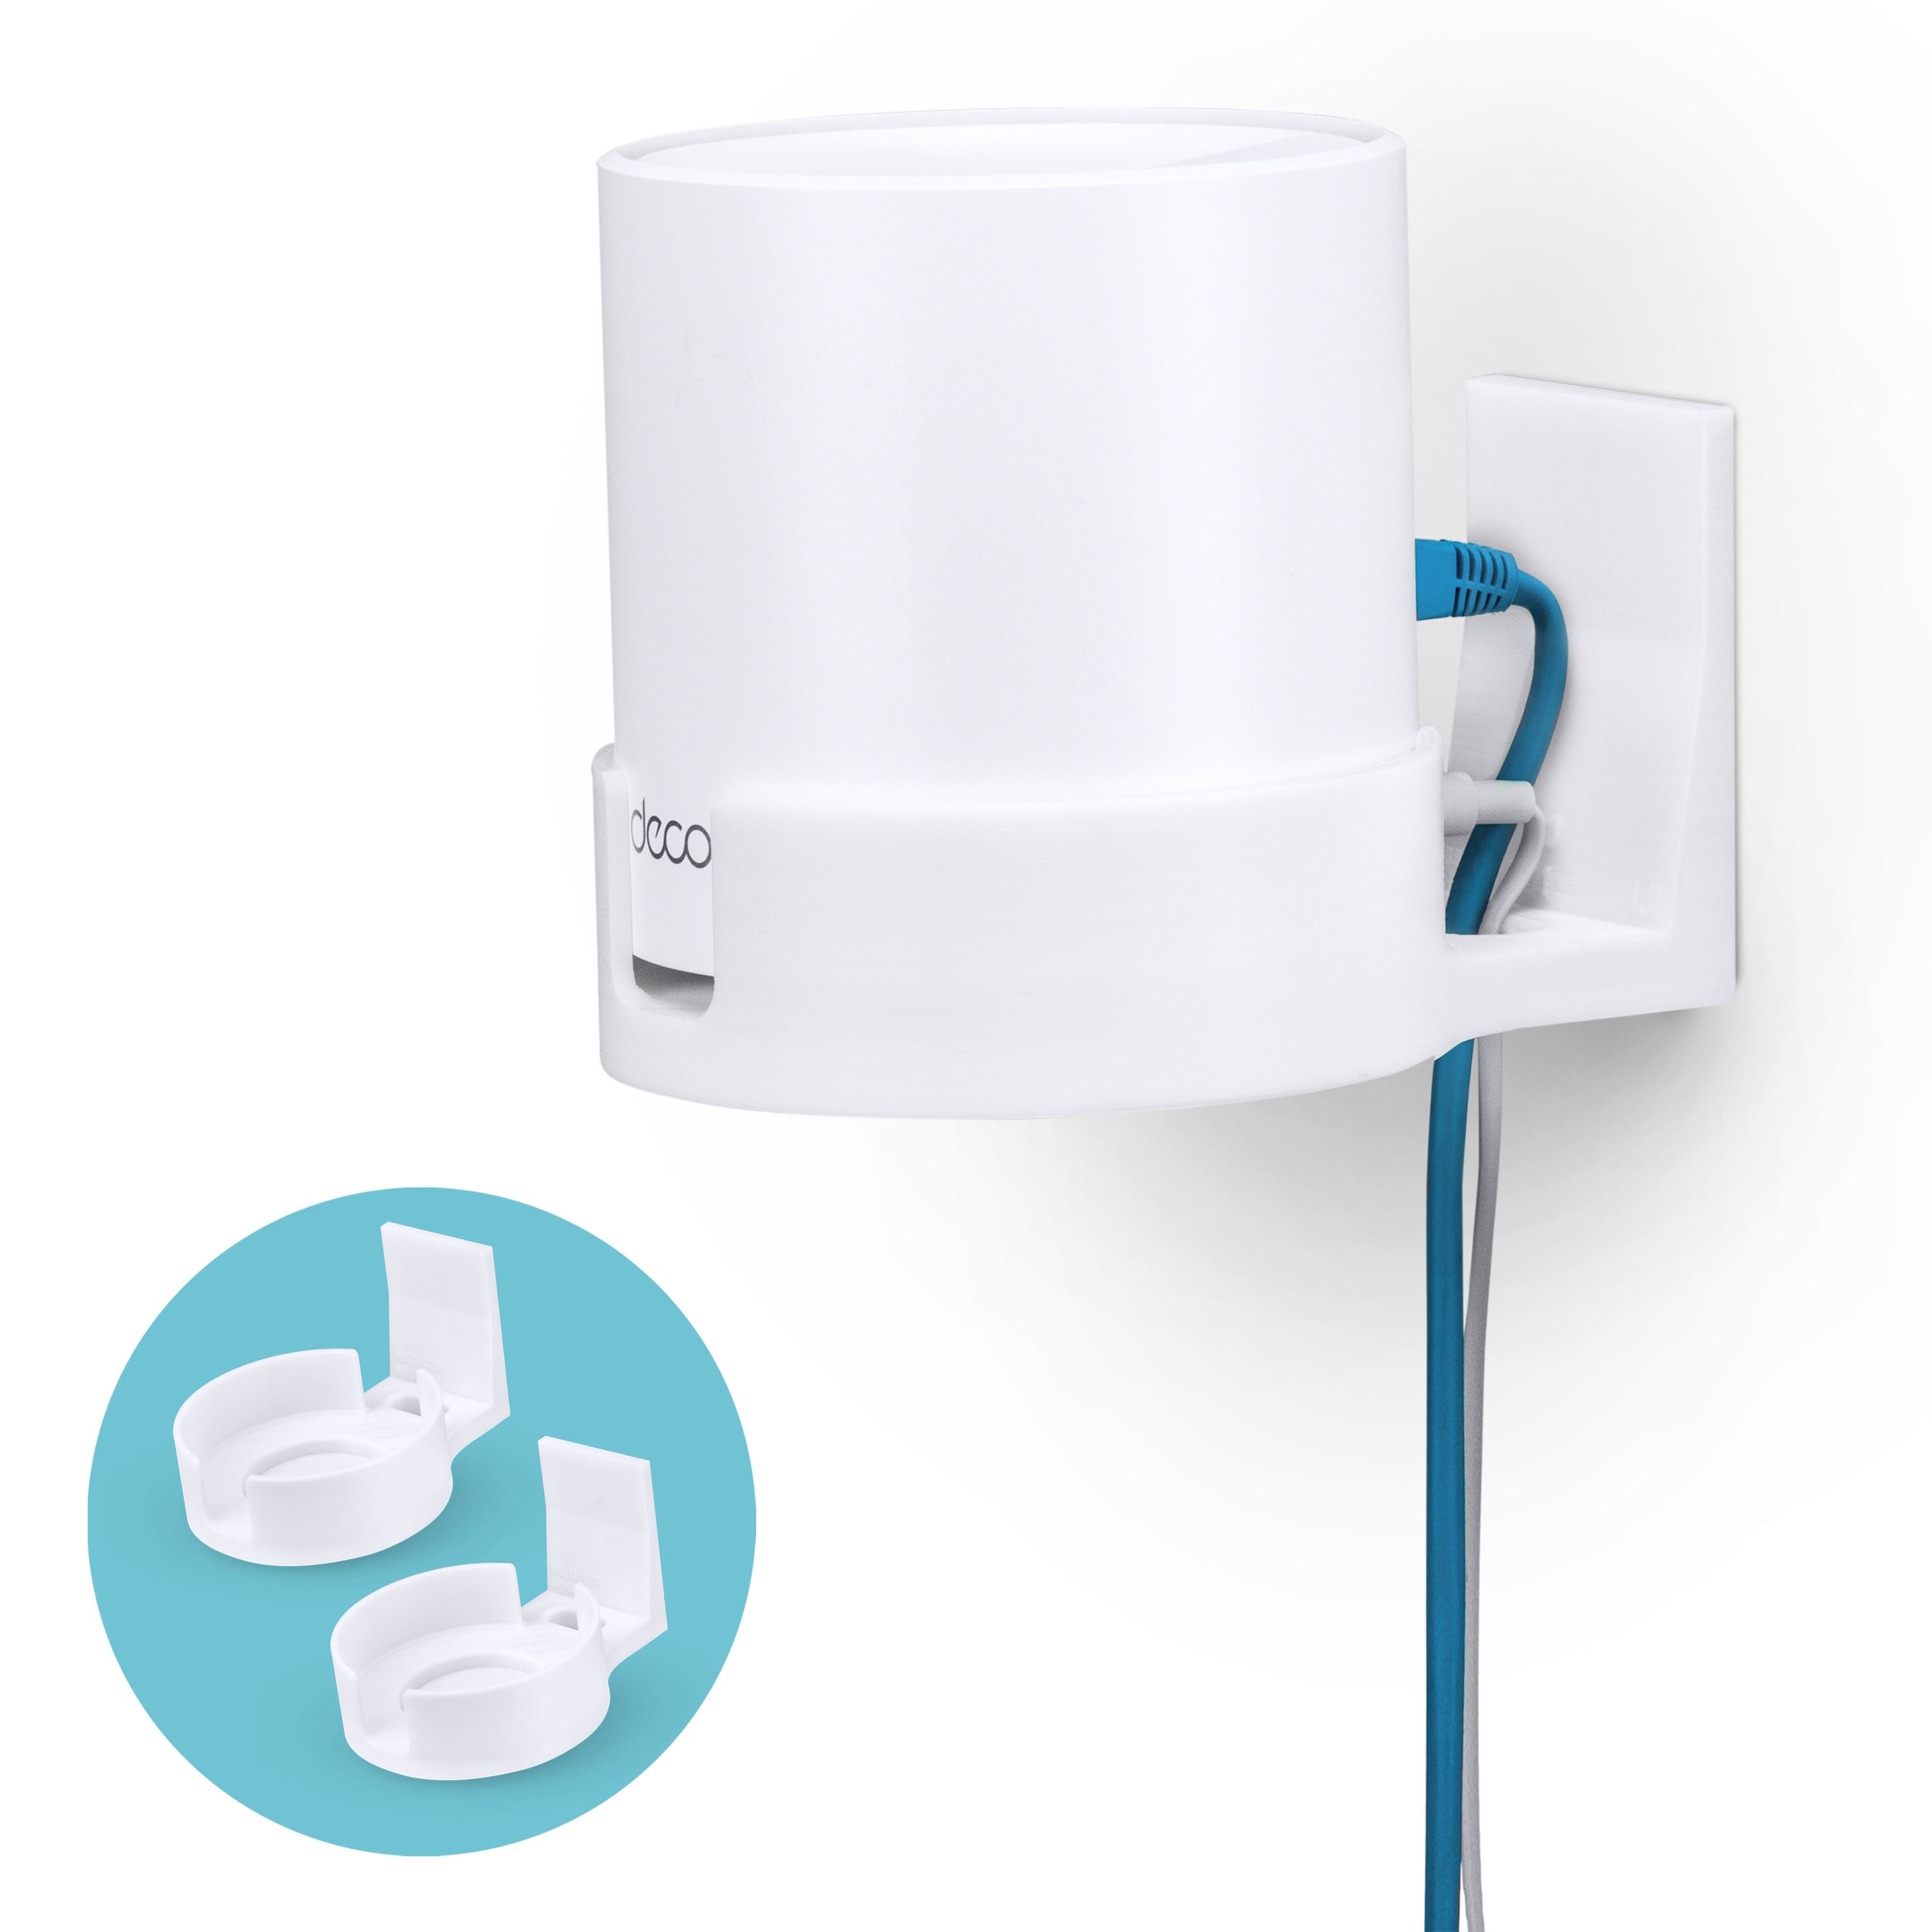 Google WiFi Adhesive Wall and Ceiling Mount (01) - Easy to Install & No Mess